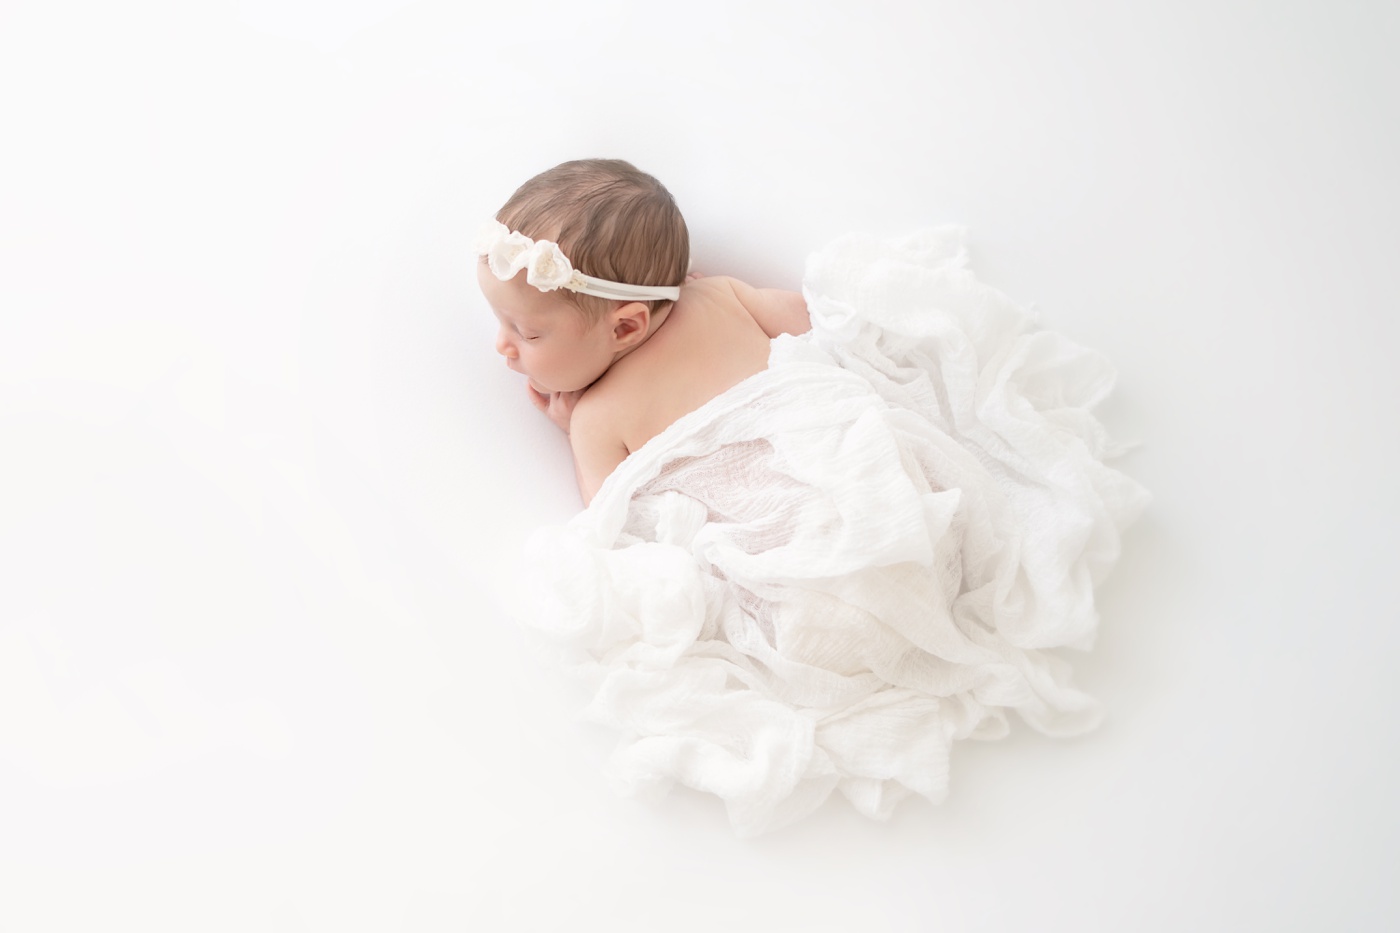  newborn baby on white bacdrop with white wrap draped over her back